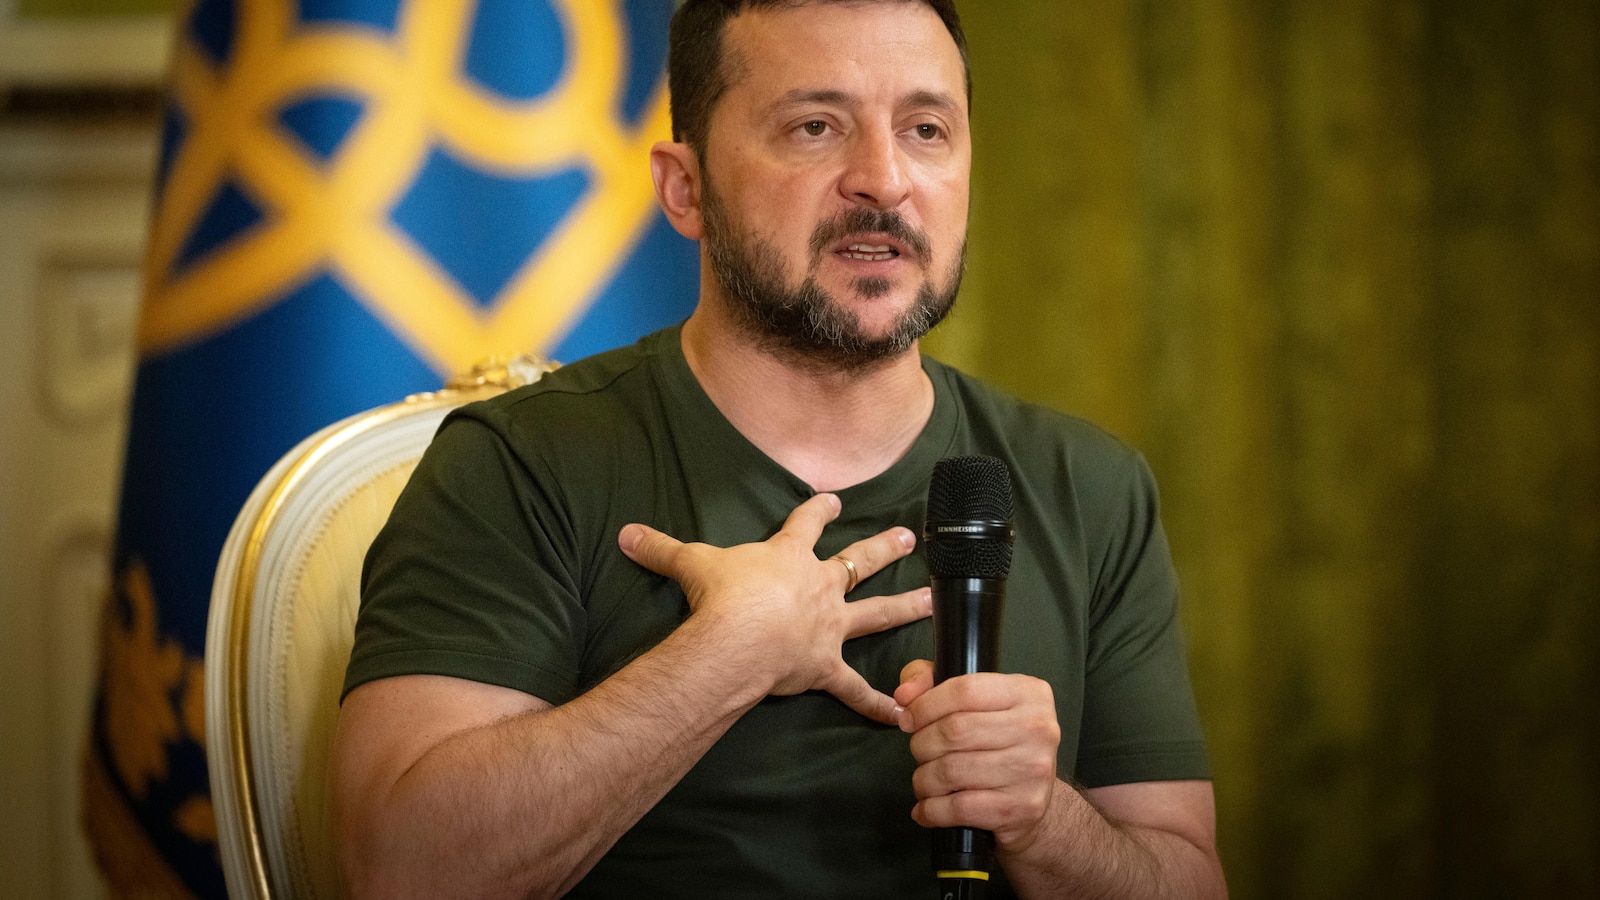 Ukraine needs 25 Patriot air defense systems and more F-16 warplanes, Zelenskyy says